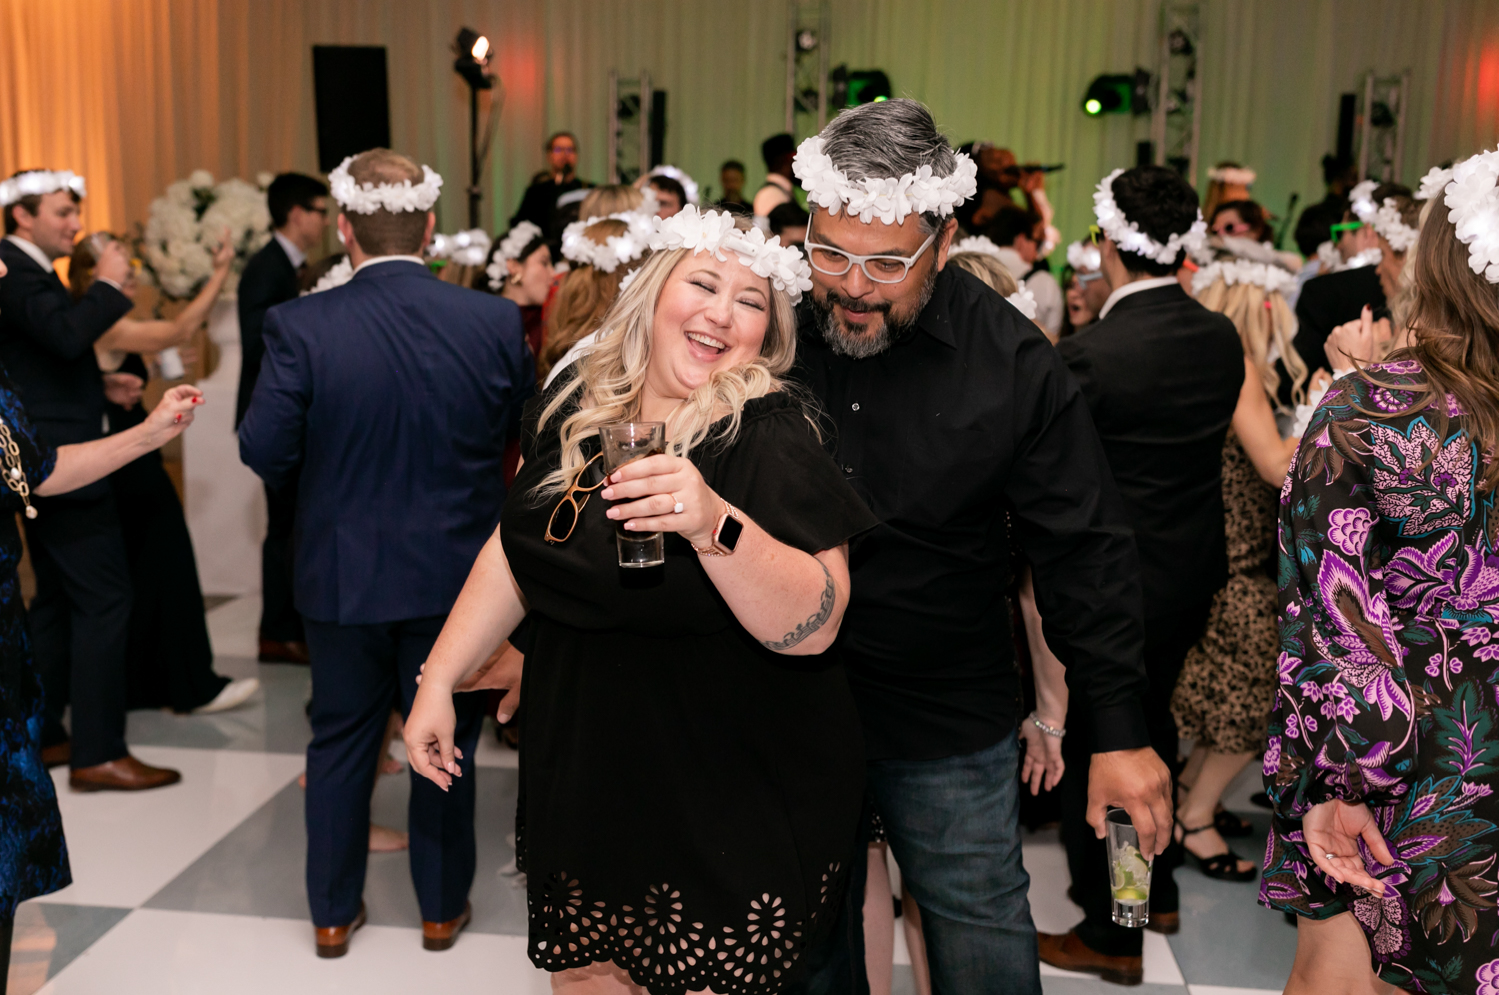 The couple dances on the floor, wearing white flower crowns along with the rest of the guests.